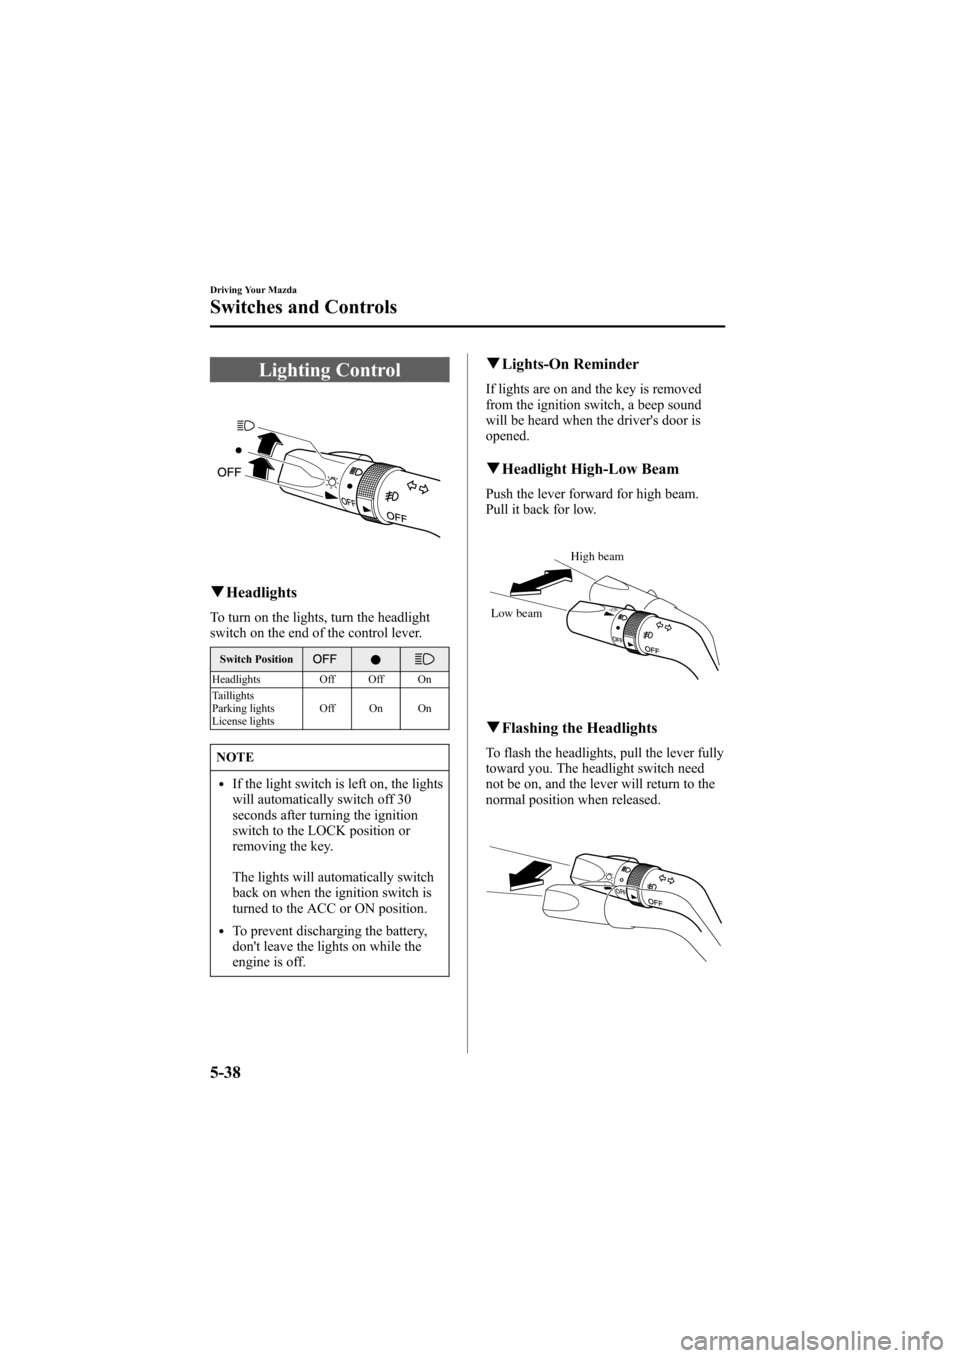 MAZDA MODEL 6 2005   (in English) User Guide Black plate (162,1)
Lighting Control
qHeadlights
To turn on the lights, turn the headlight
switch on the end of the control lever.
Switch Position
Headlights Off Off On
Taillights
Parking lights
Licen